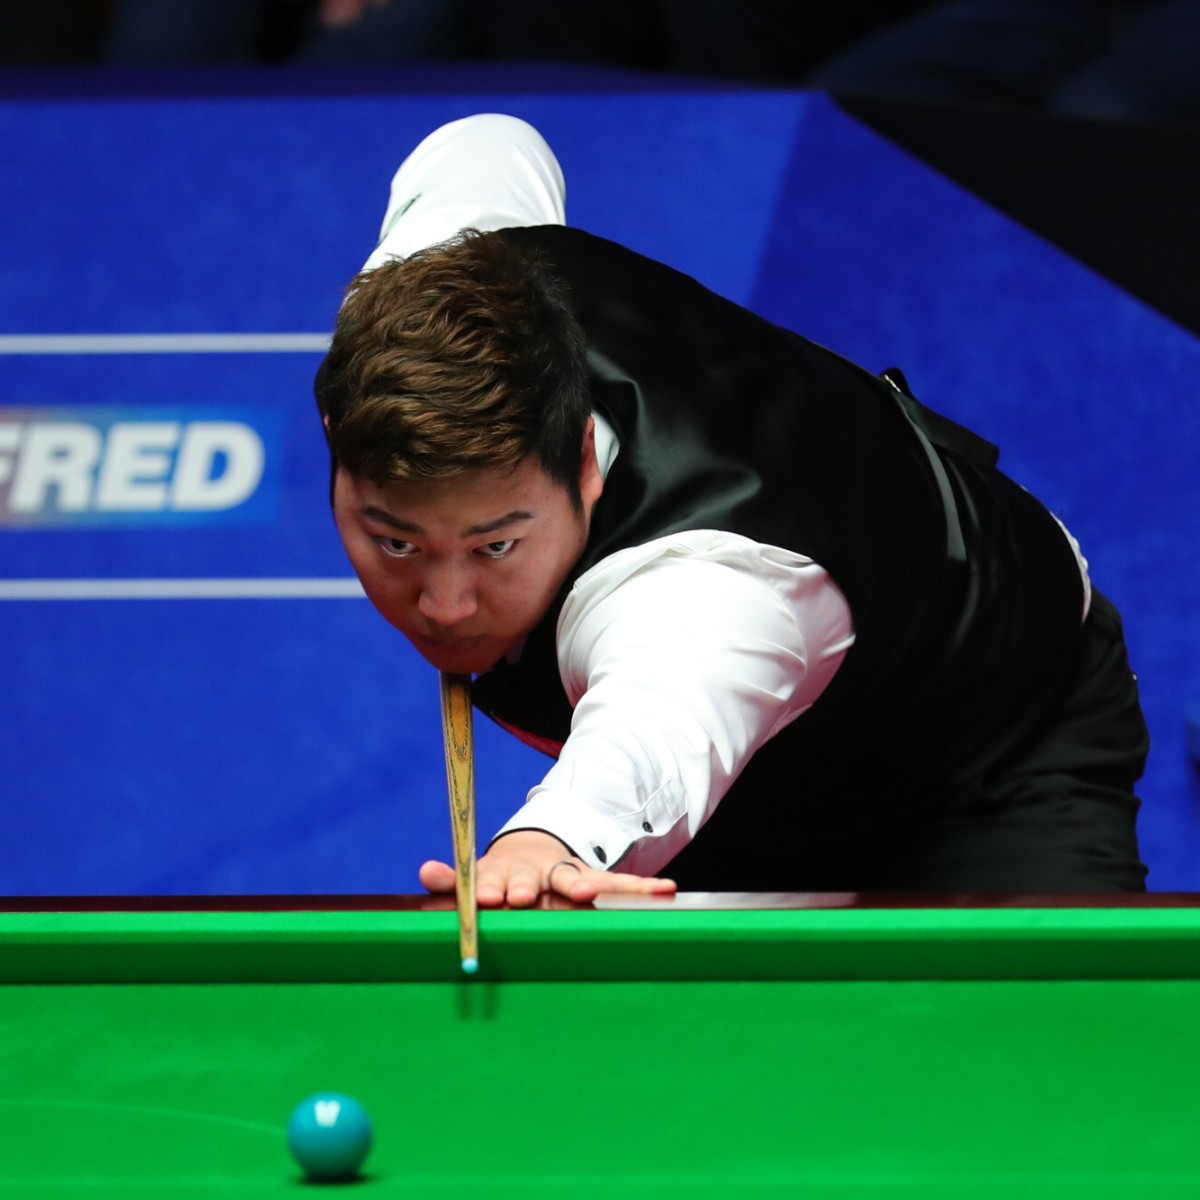 World Championship 2022 Yan Bingtao playing catch-up against Mark Williams as Class of 92 set pace South China Morning Post